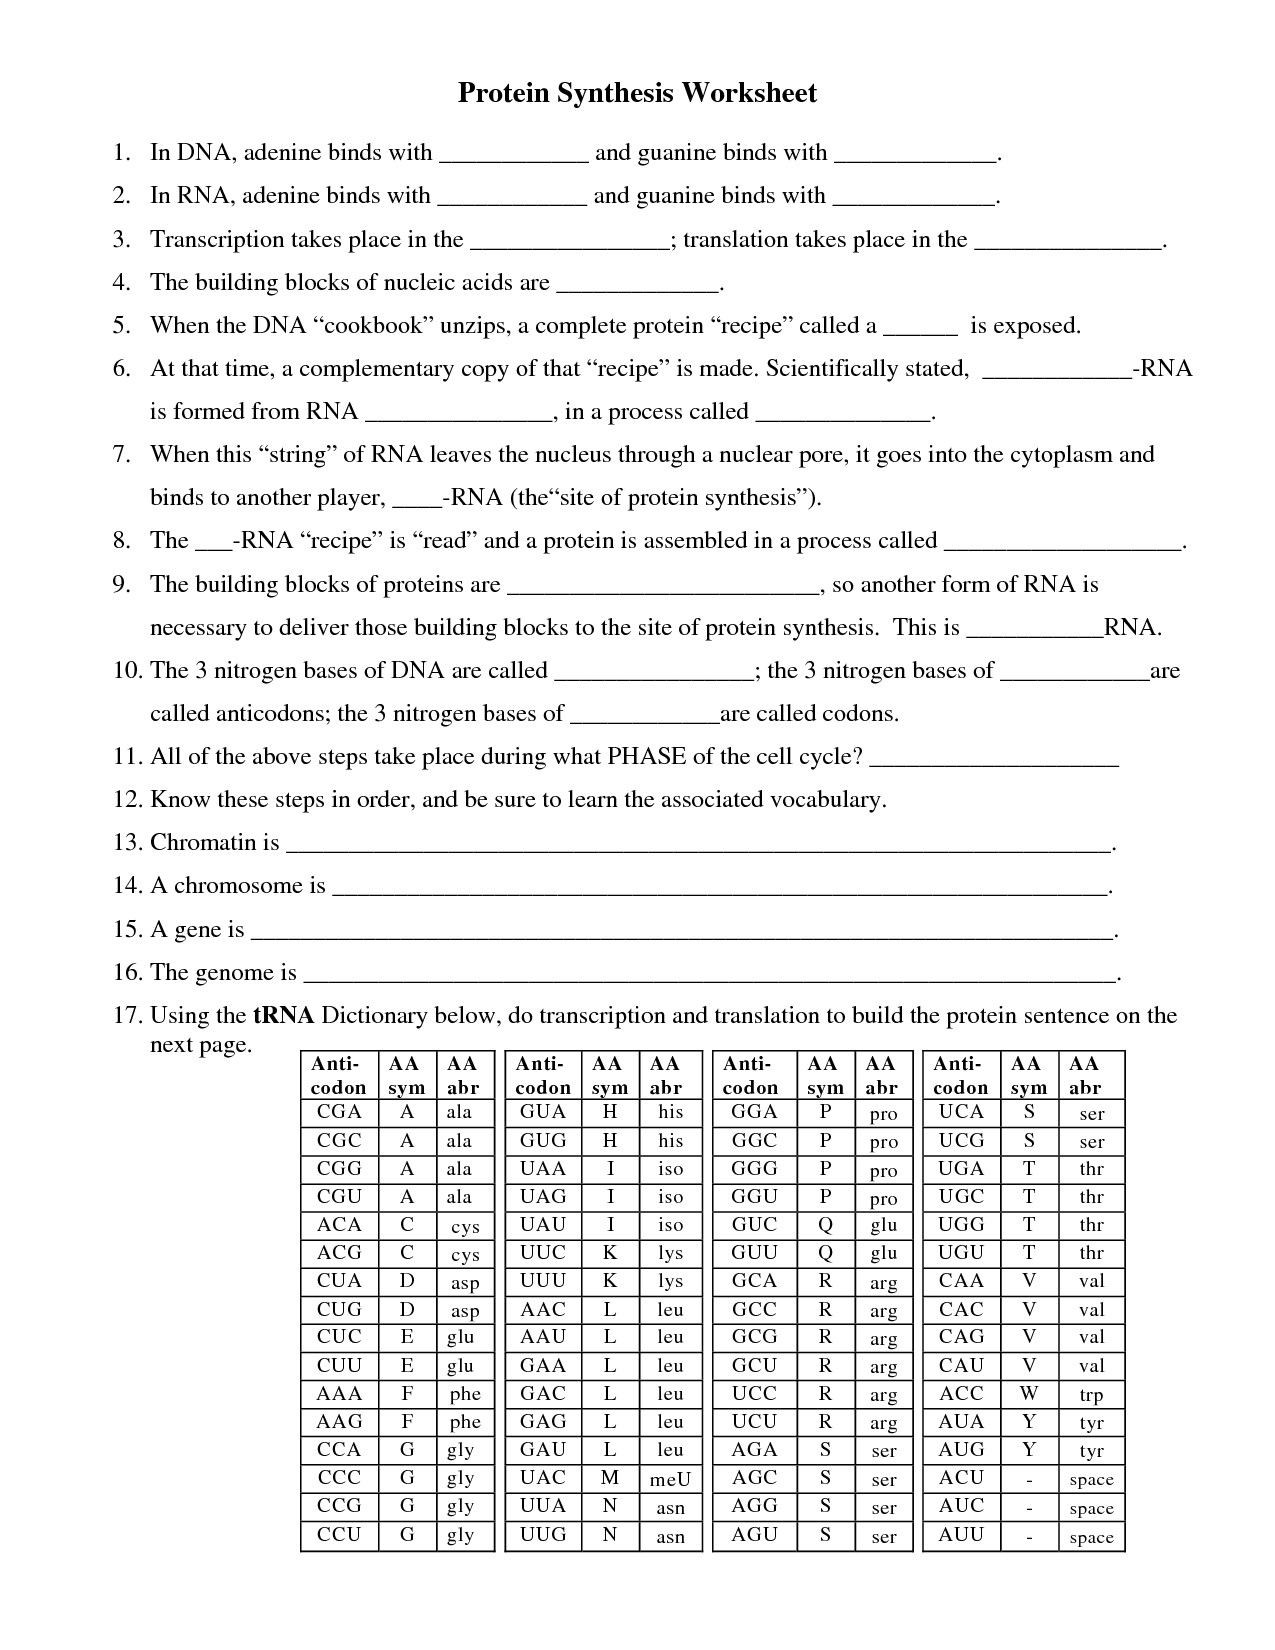 Protein Synthesis Review Worksheet Answers Prime Dna and Protein Synthesis Worksheet Answers